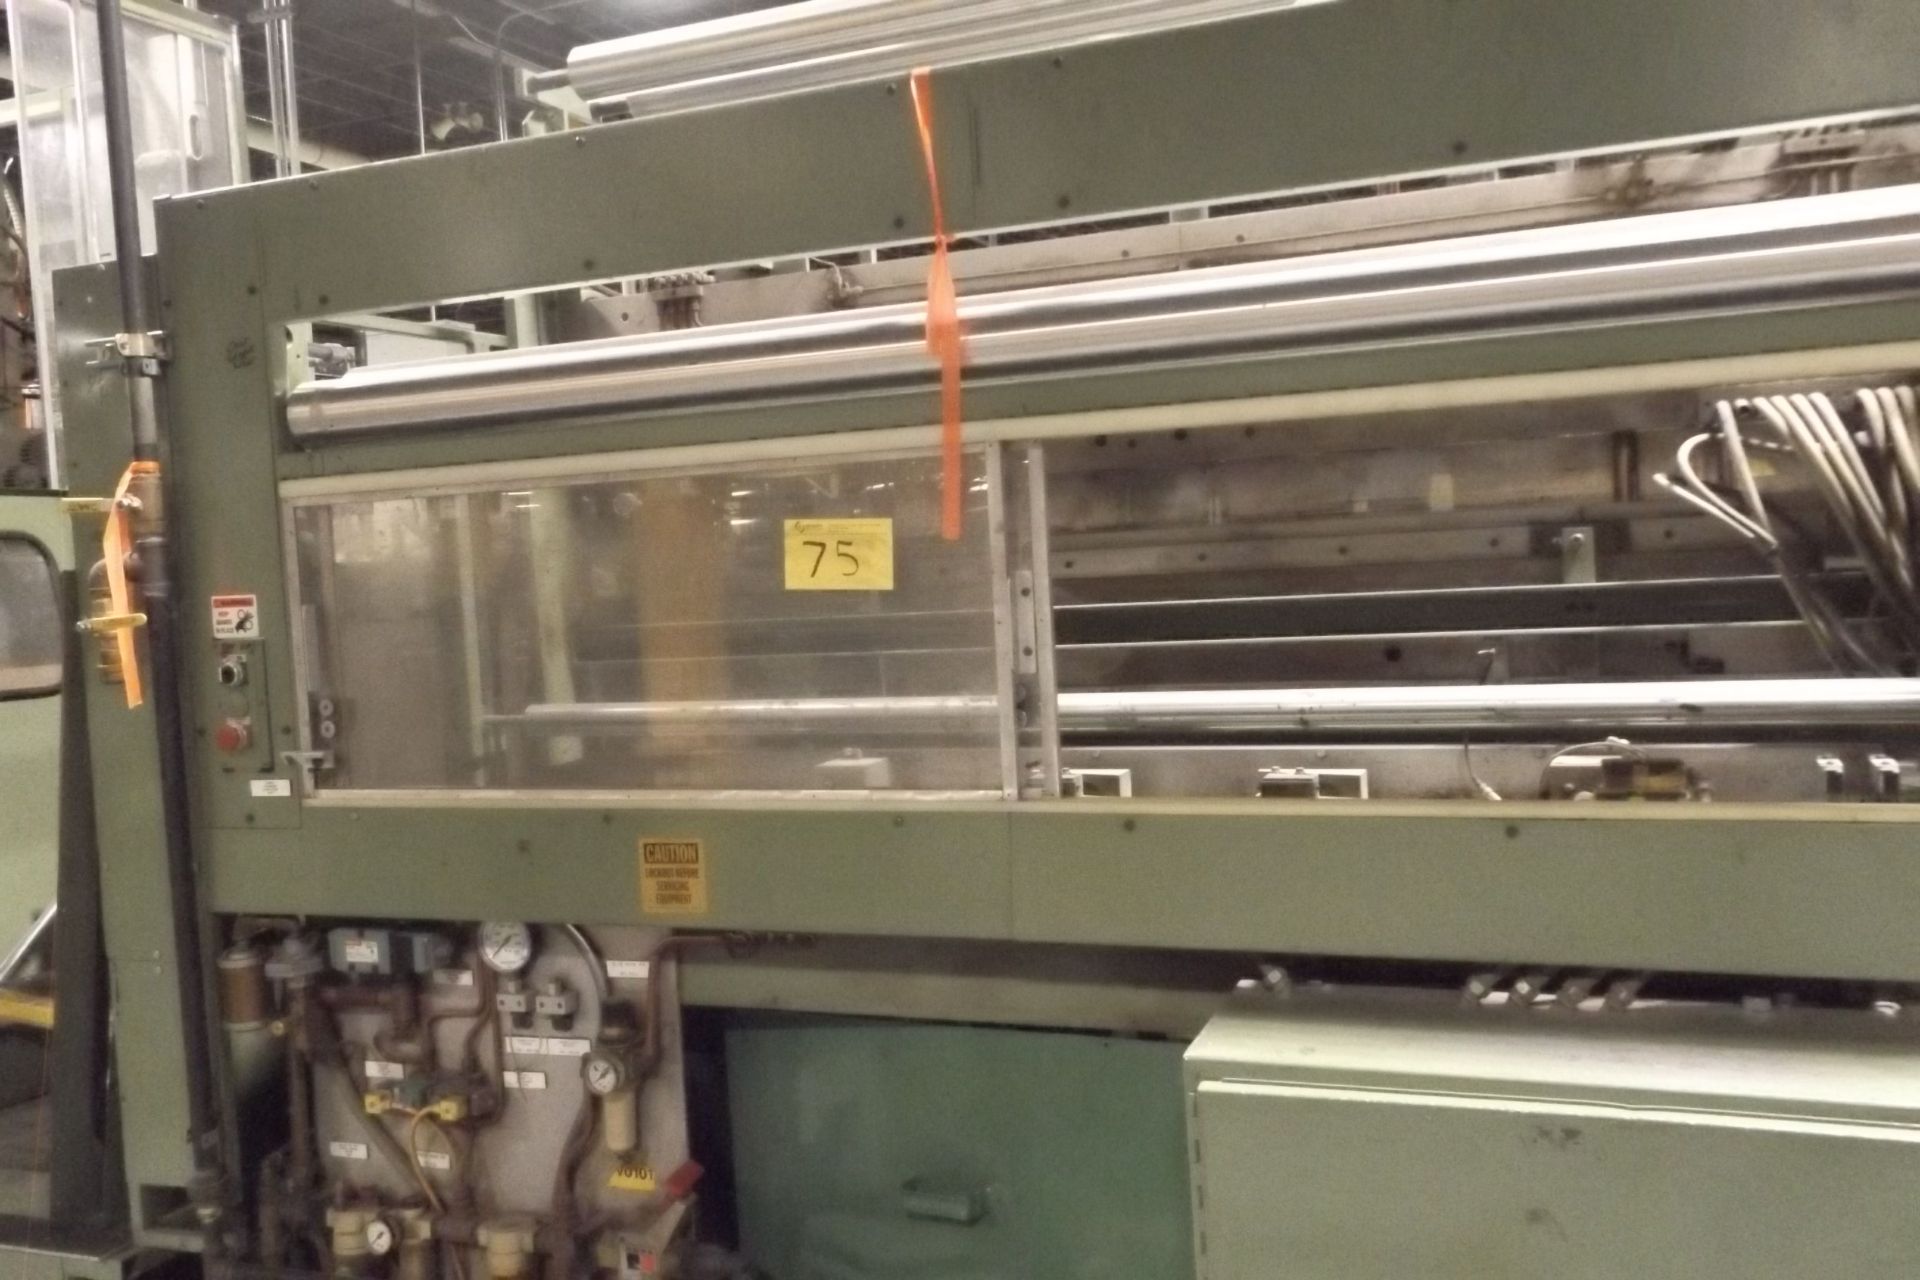 1992 BRETTING Automatic Bander/Wrapper, s/n 4557-92, (1) Infeed Lane, Number of Layer: 1, Wrapping